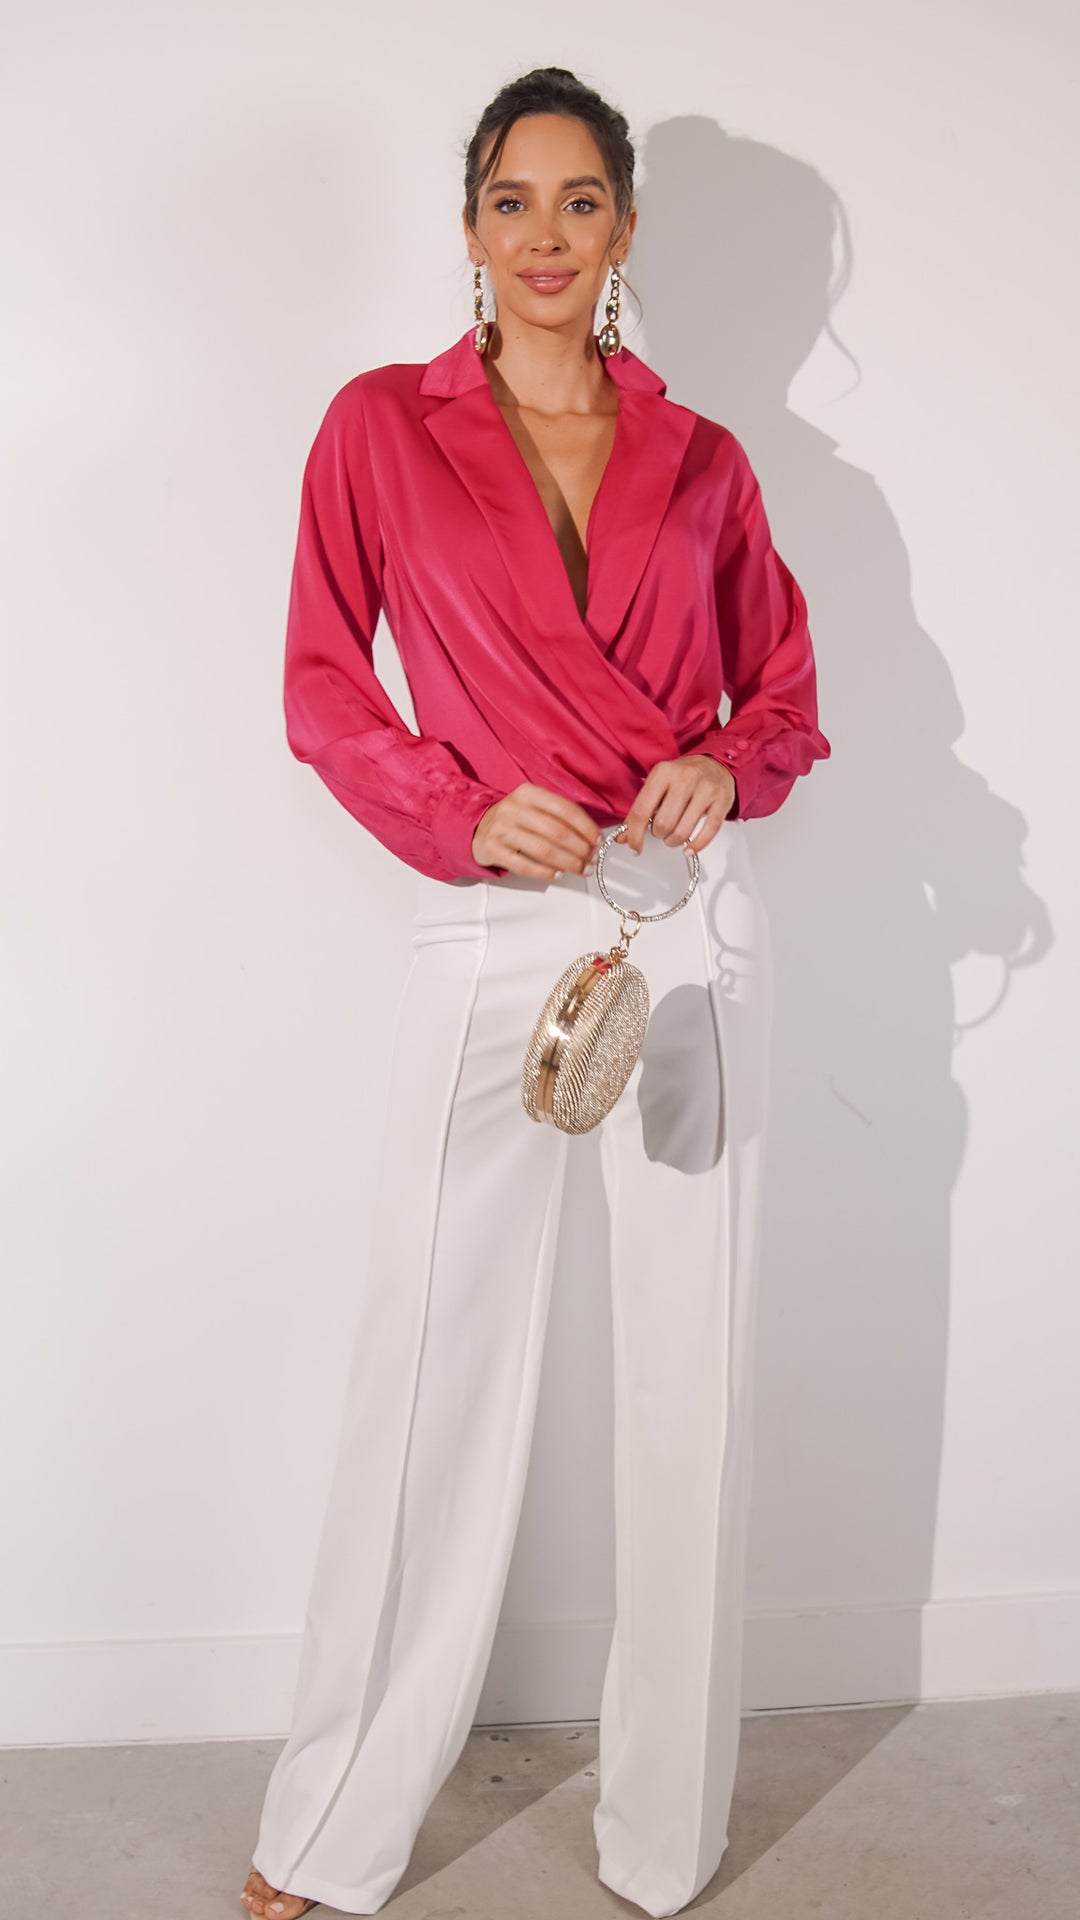 Madison Satin Longsleeve Top in Pink